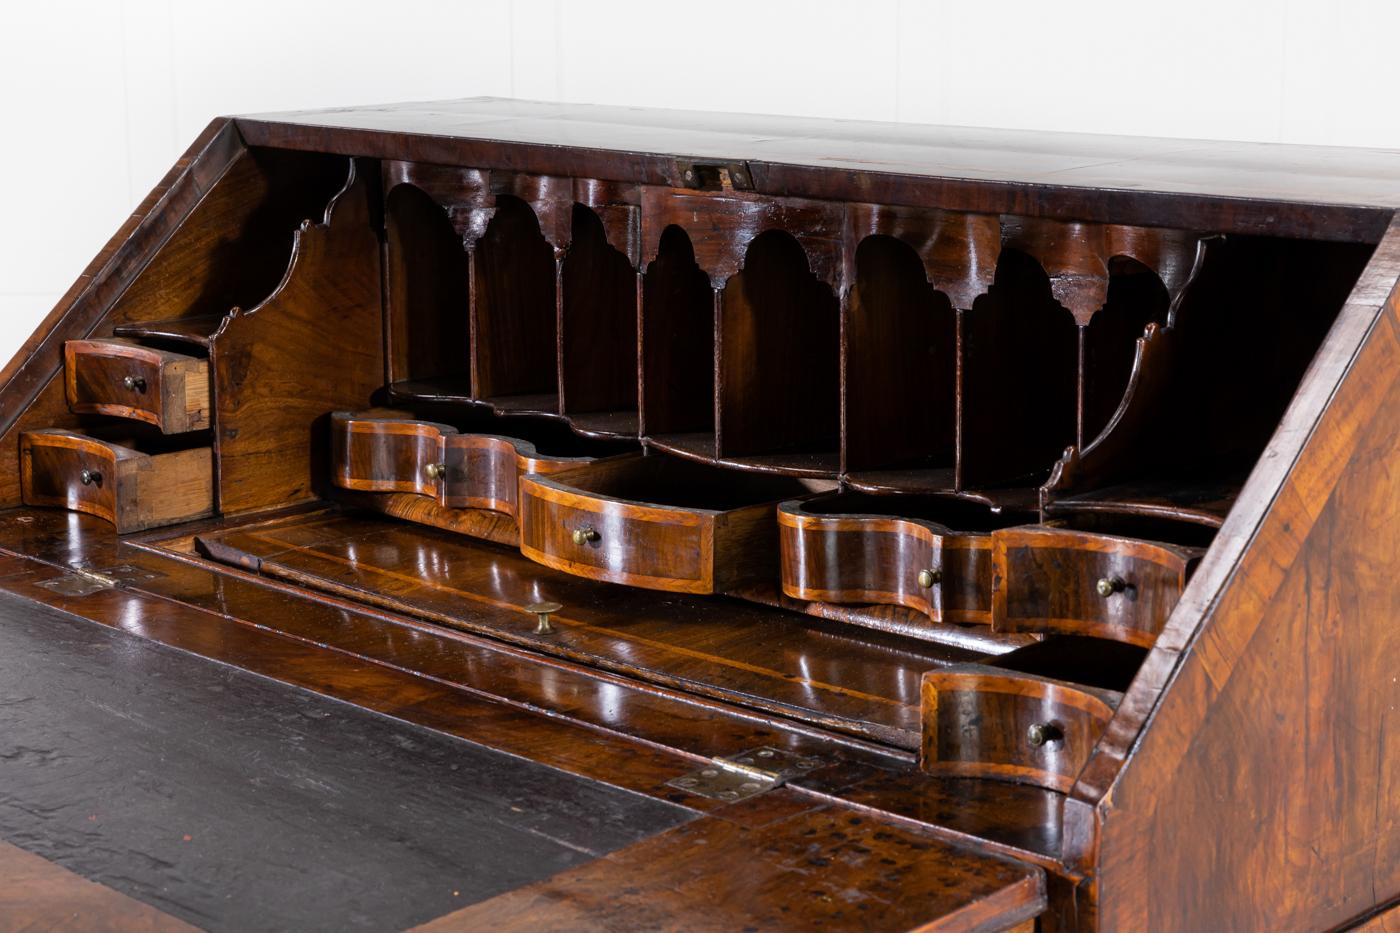 Early 18th century Queen Anne walnut bureau with one of the finest interiors of this model.